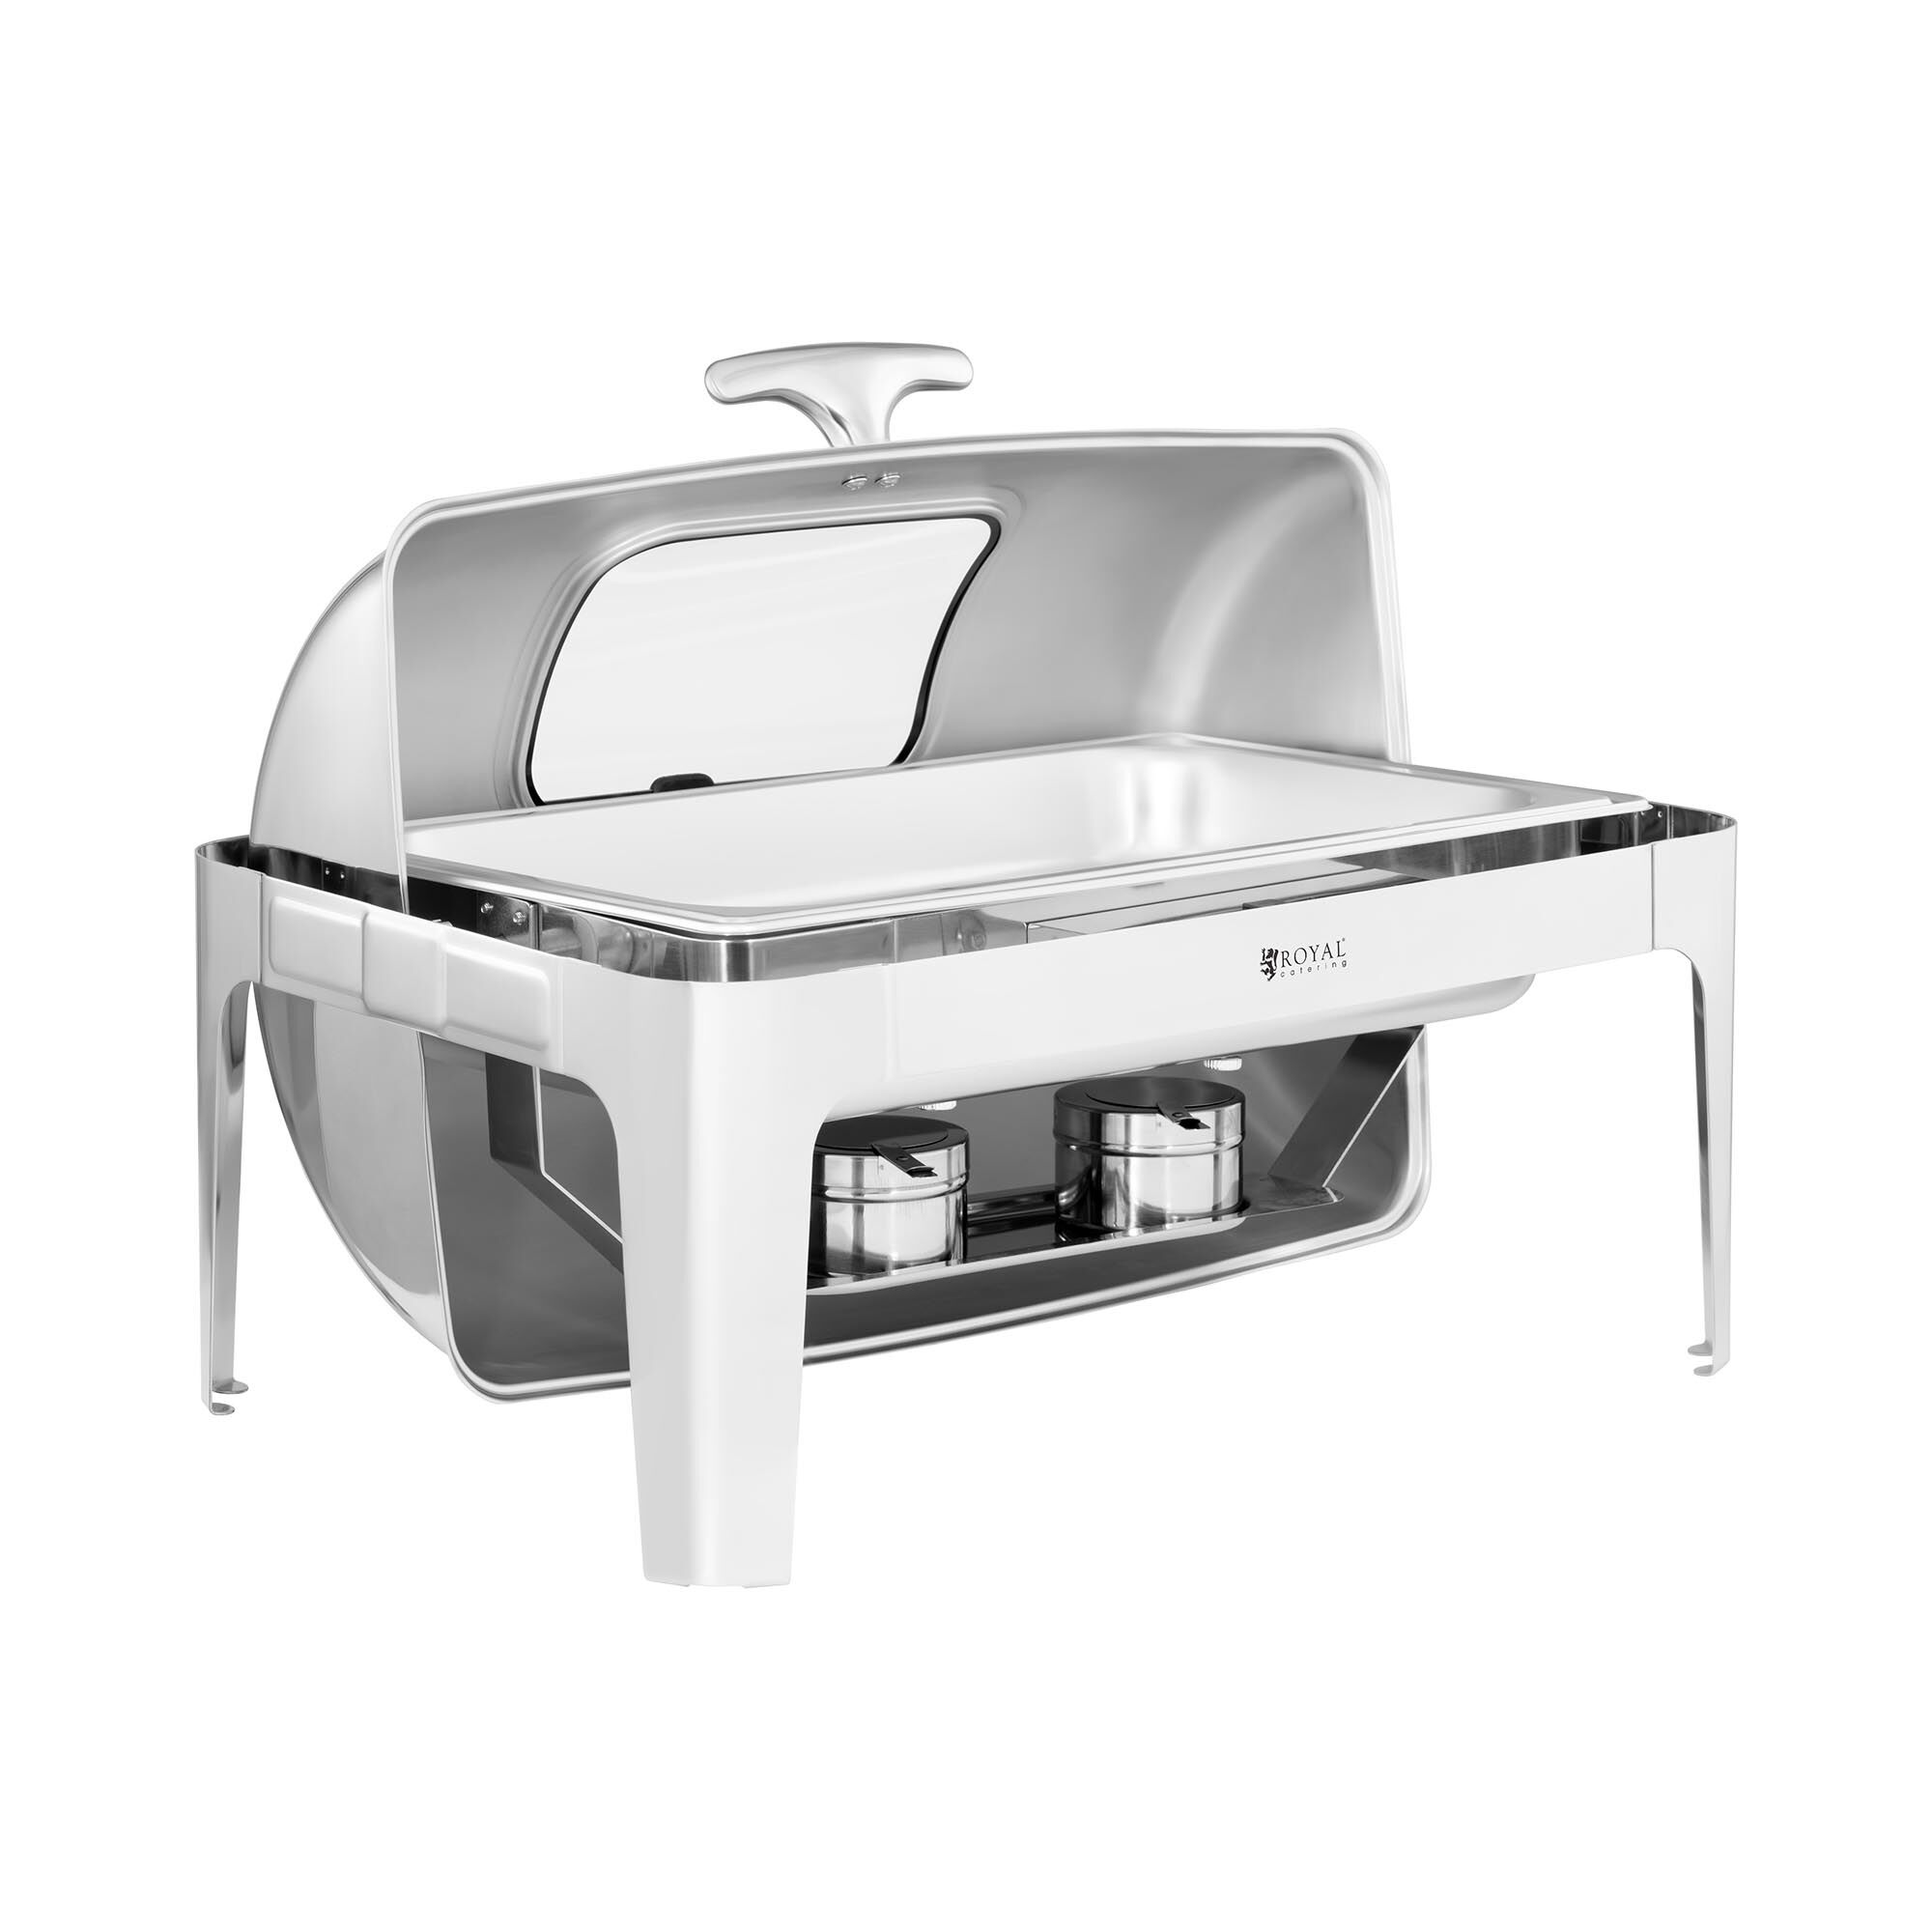 Royal Catering Chafing Dish - 1/1 GN - Royal Catering - 8.5 L - 2 fuel cells - viewing window